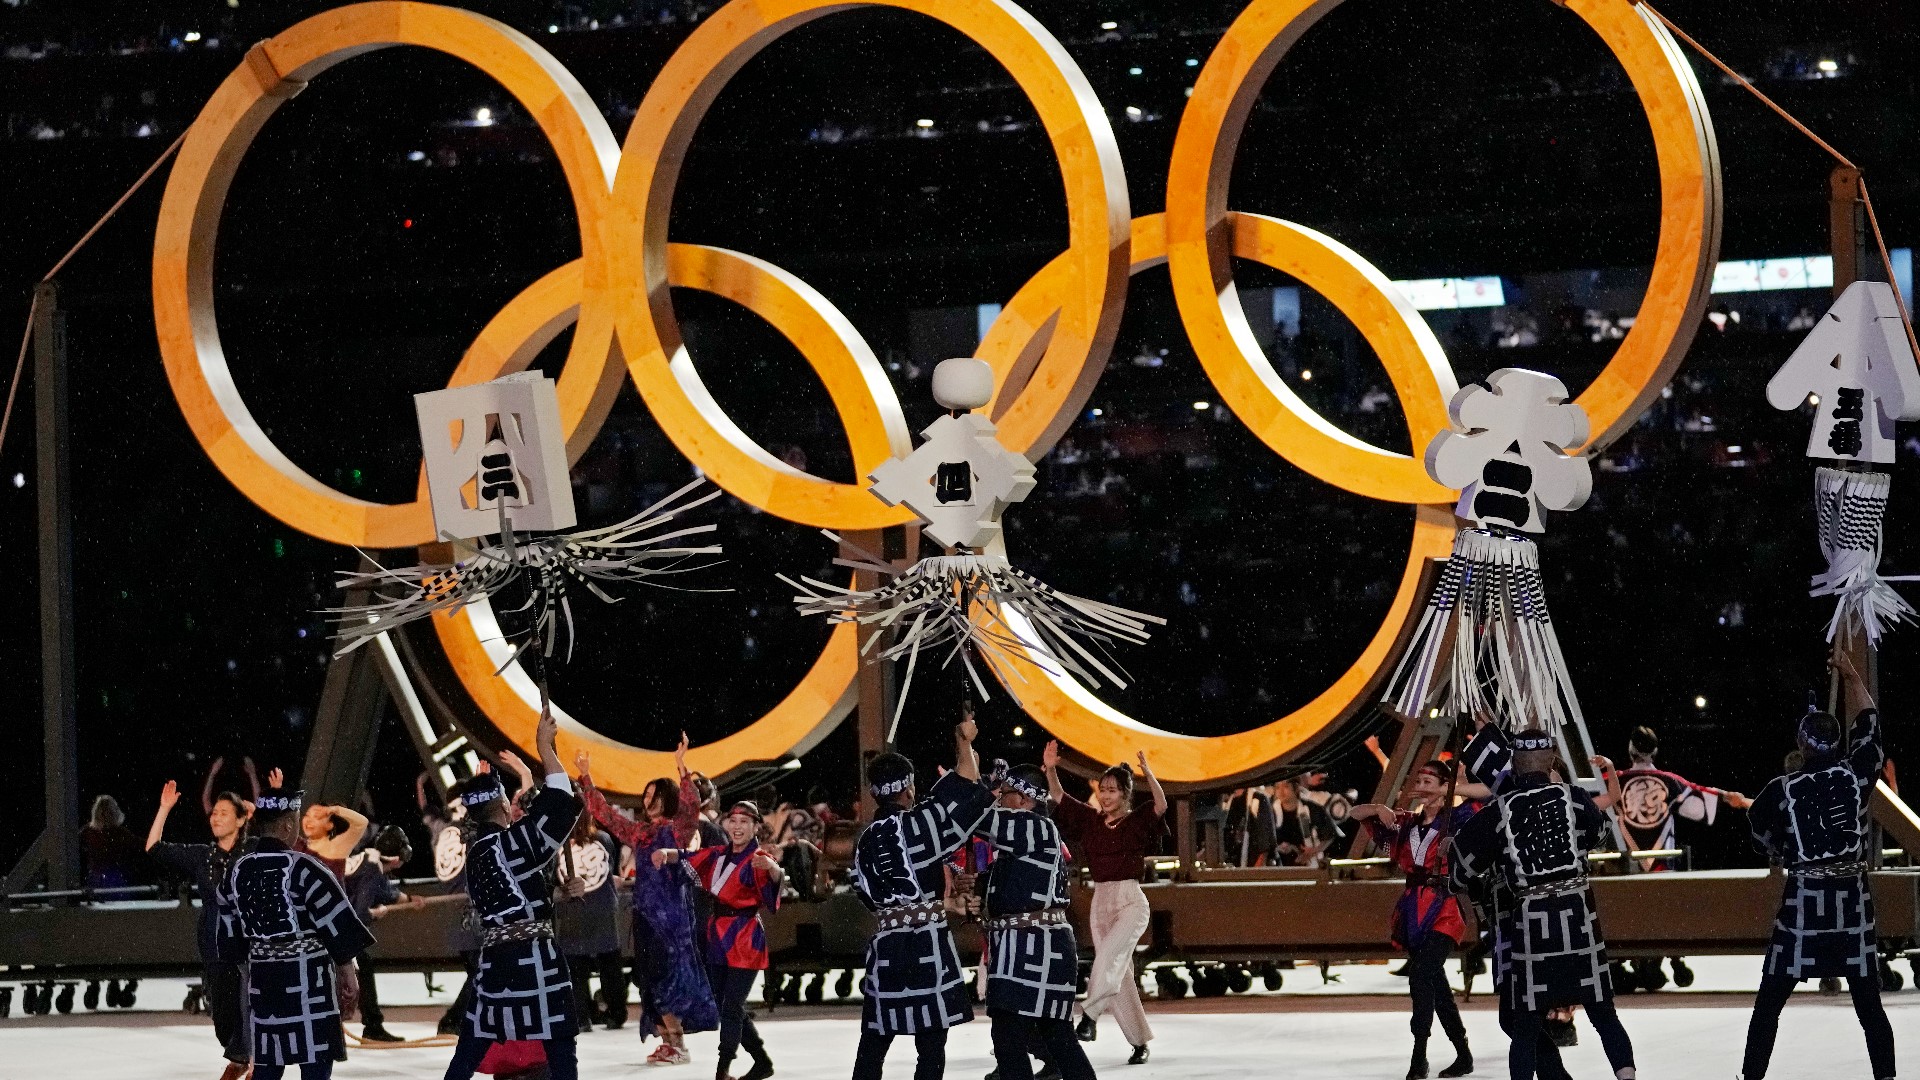 Tributes, dancing, color and fireworks were on display during the Tokyo Olympics opening ceremonies on Friday morning.